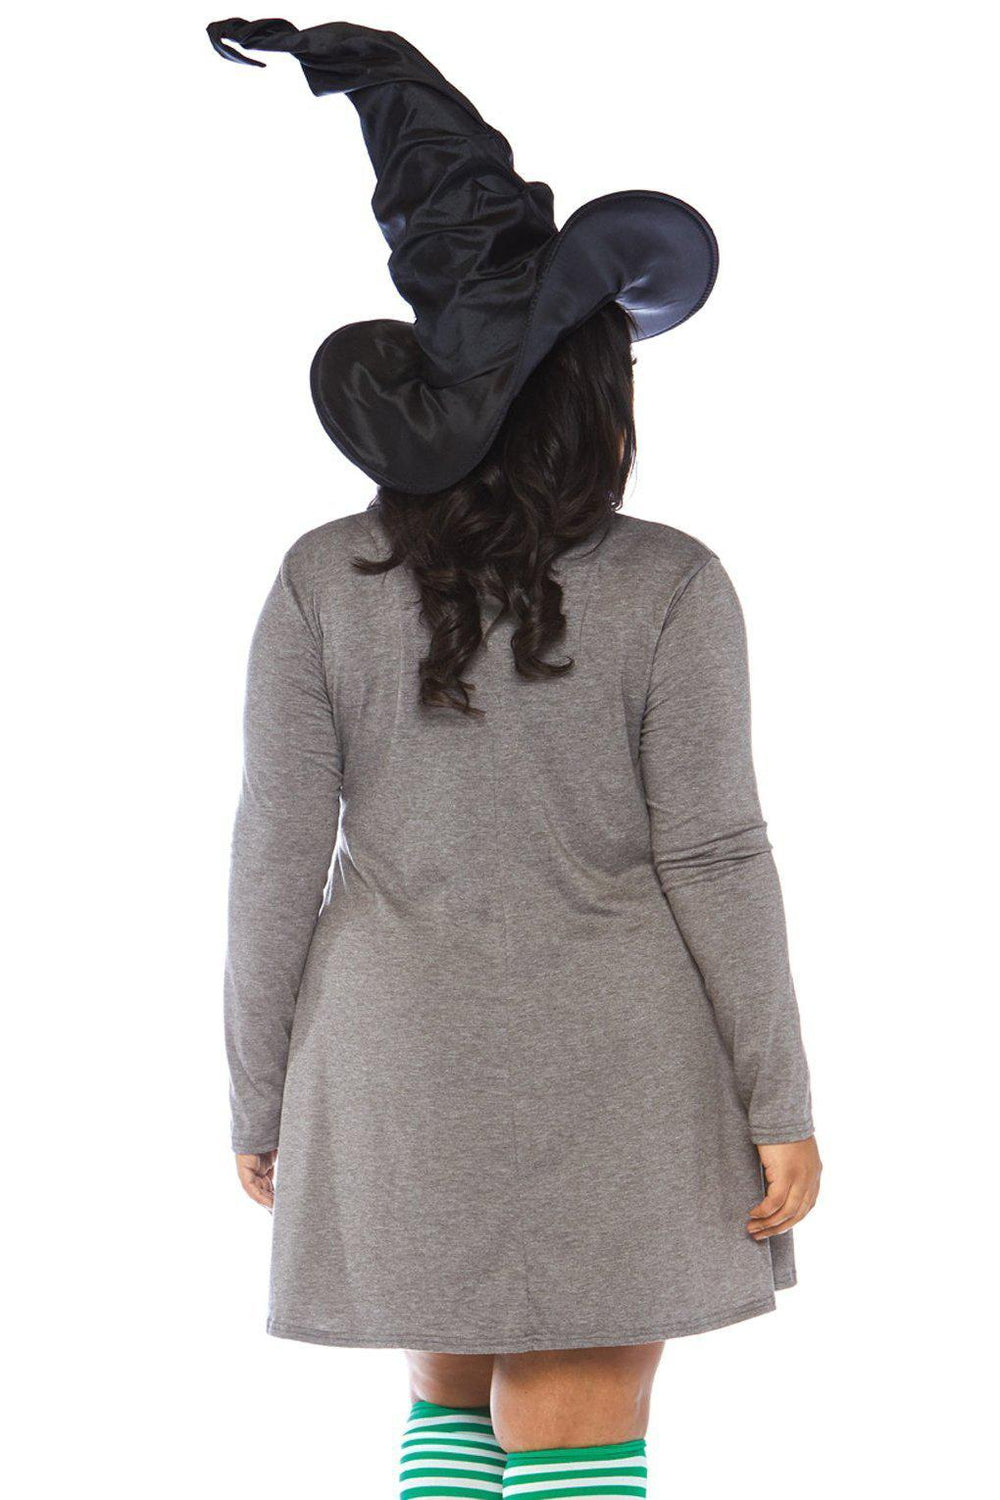 Plus Size Basic Witch Jersey Dress-Witch Costumes-Leg Avenue-SEXYSHOES.COM